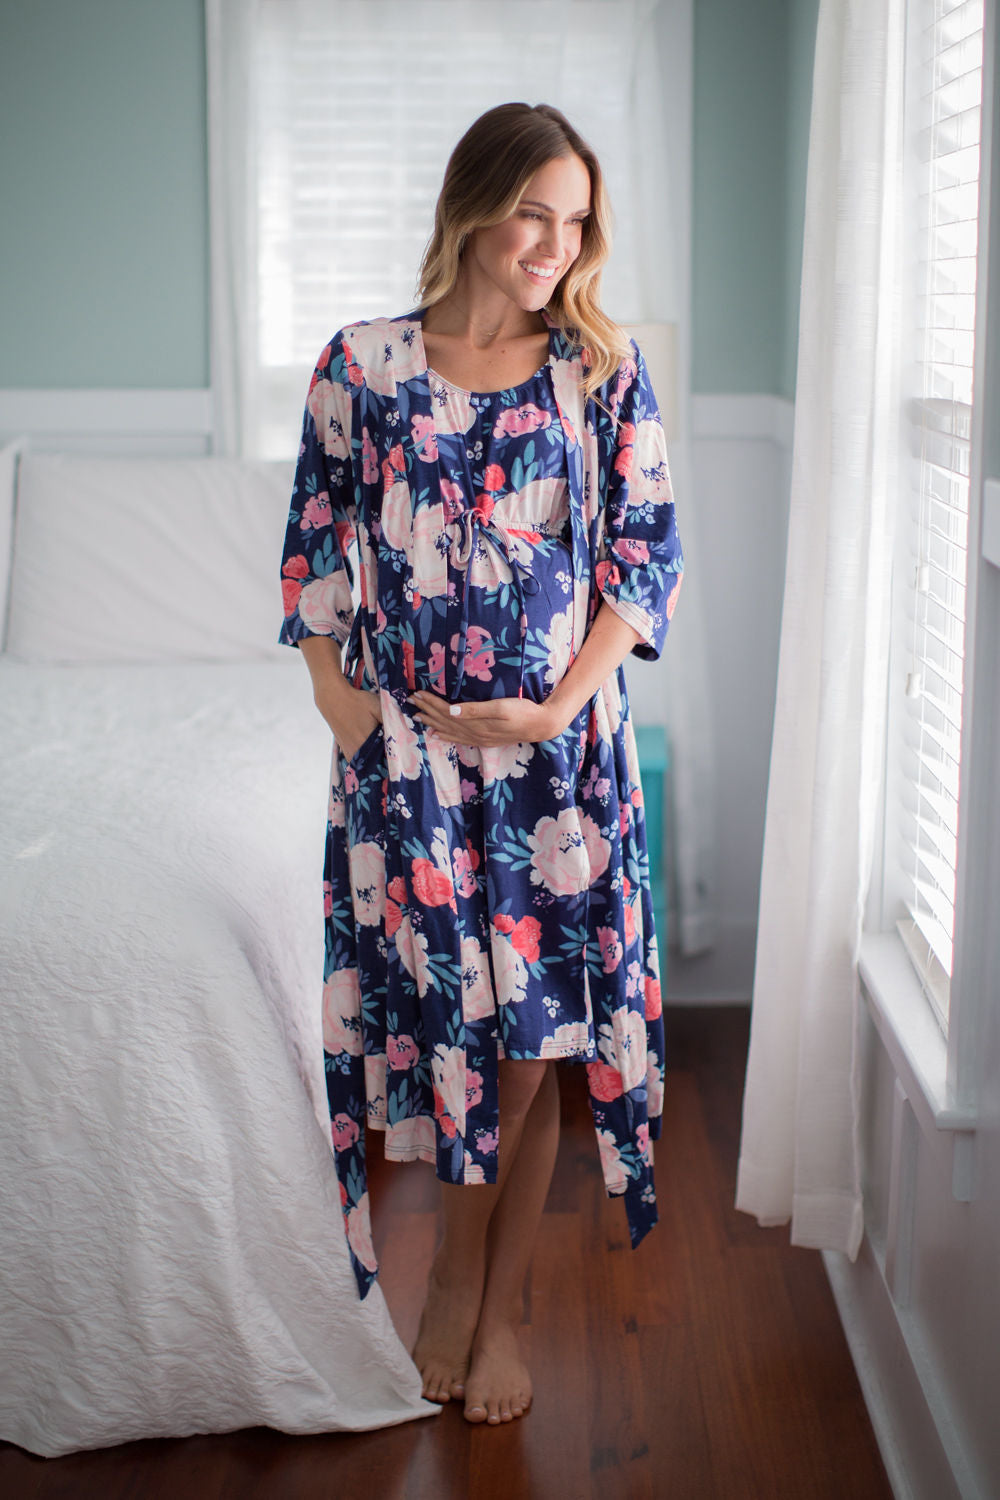 Labor & Delivery Hospital Gown with Matching Robe, floral & feminine yet functional. Snaps down back for modesty & off Shoulder for skin to skin contact or breastfeeding. Best Selling bring your own gown to hospital